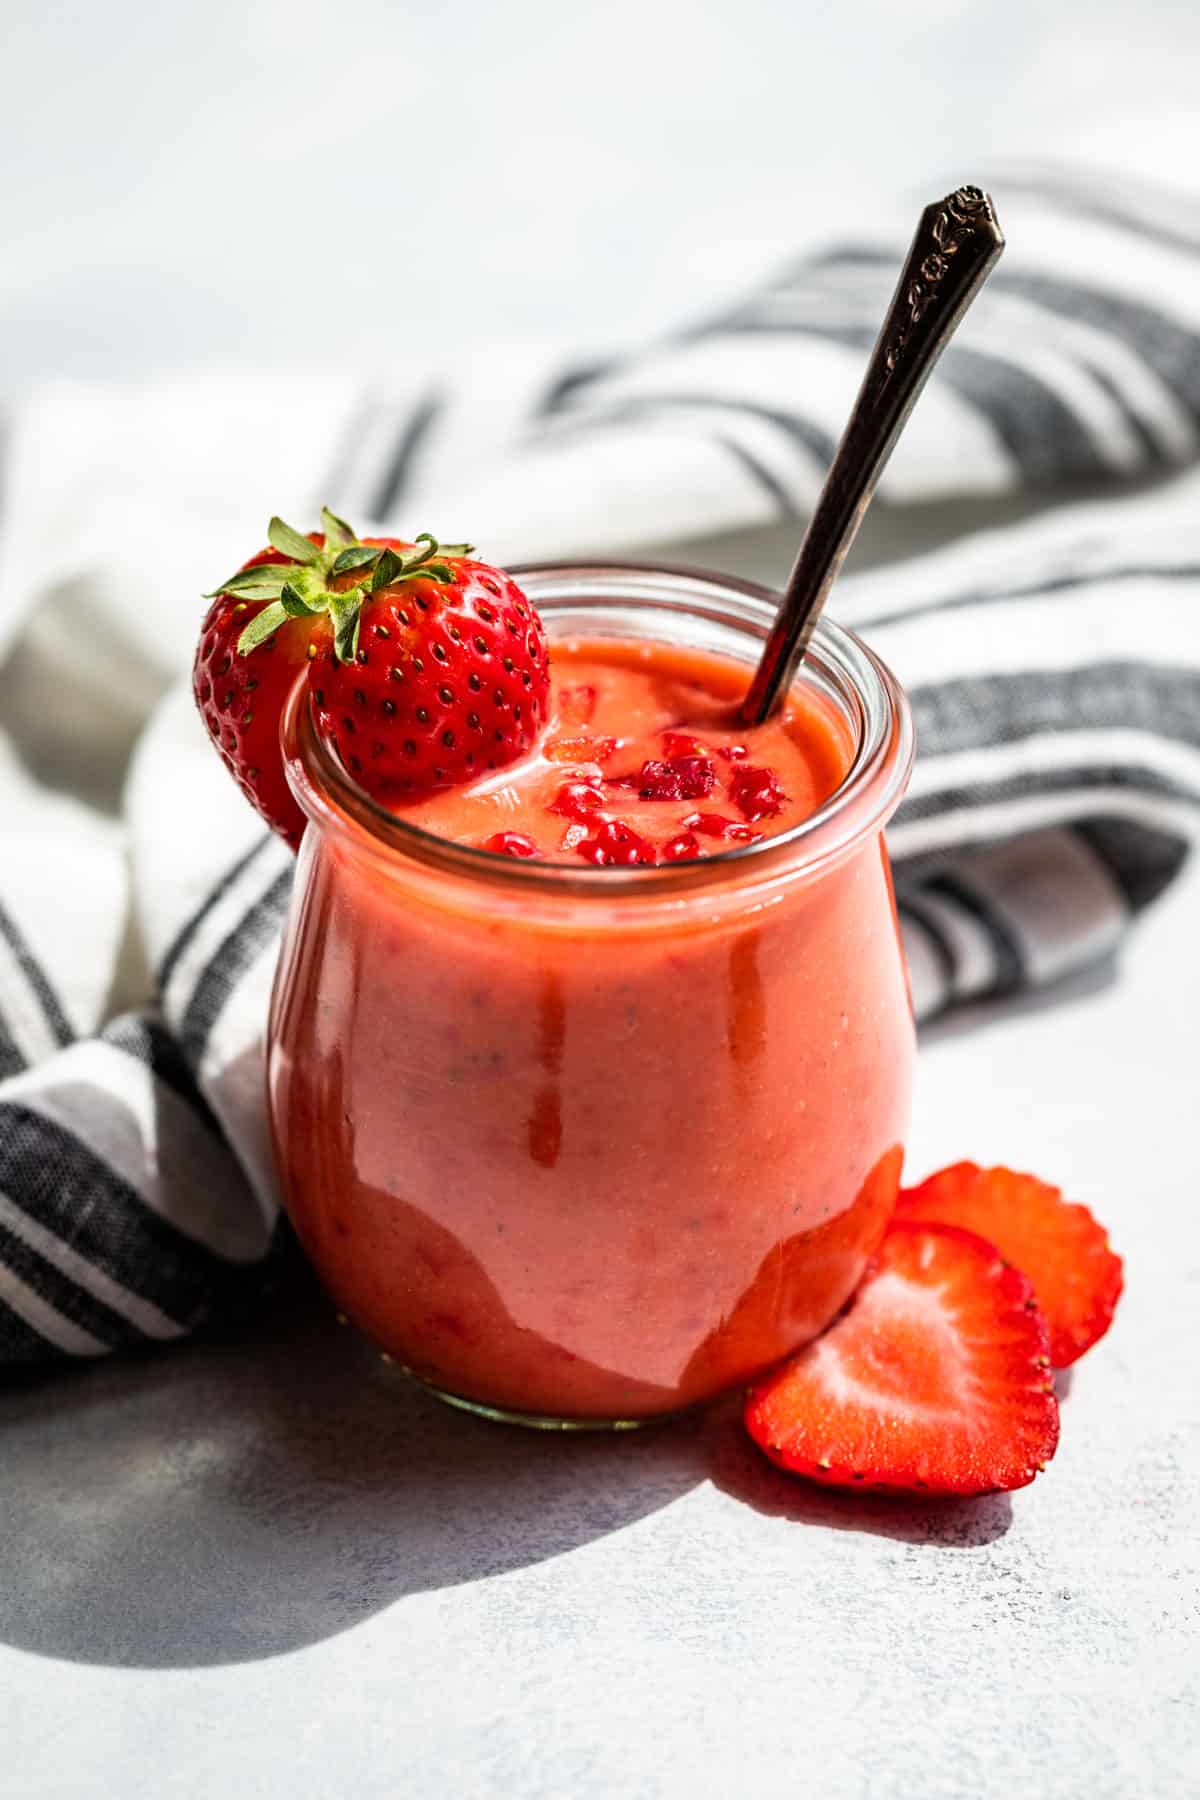 Side view of Strawberry Vinaigrette in a clear glass jar with a silver spoon and a strawberry garnish.